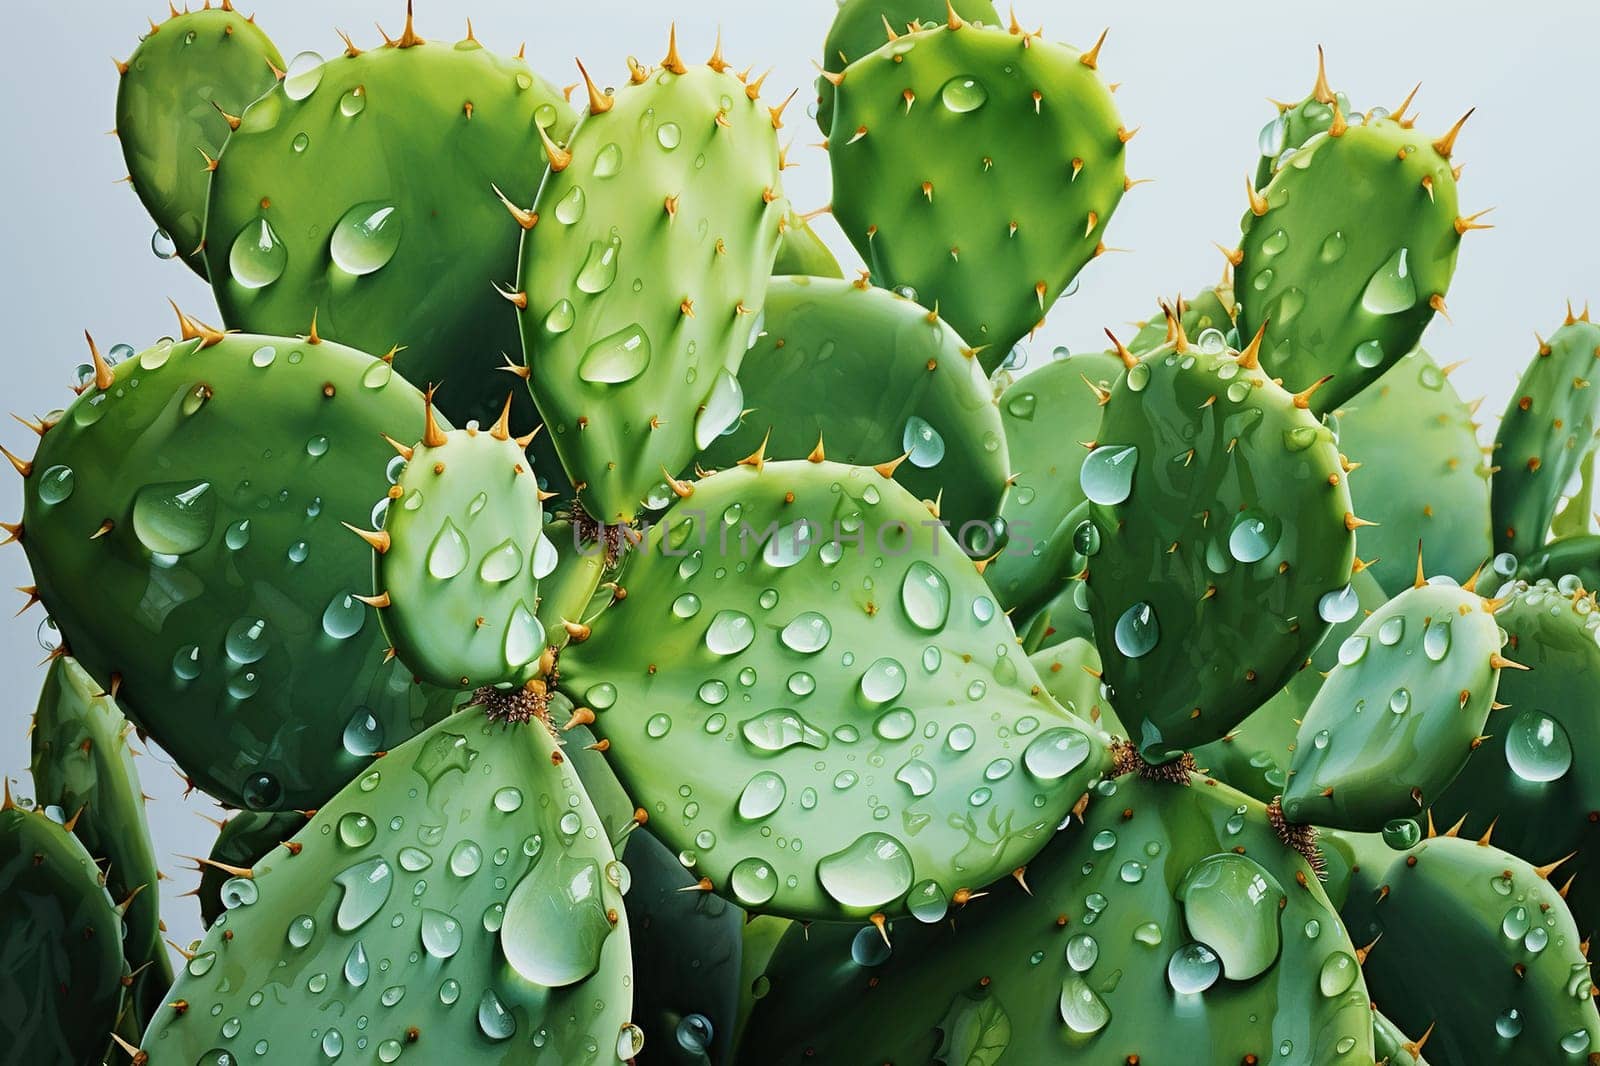 Close-up texture of a cactus with spines in water droplets.